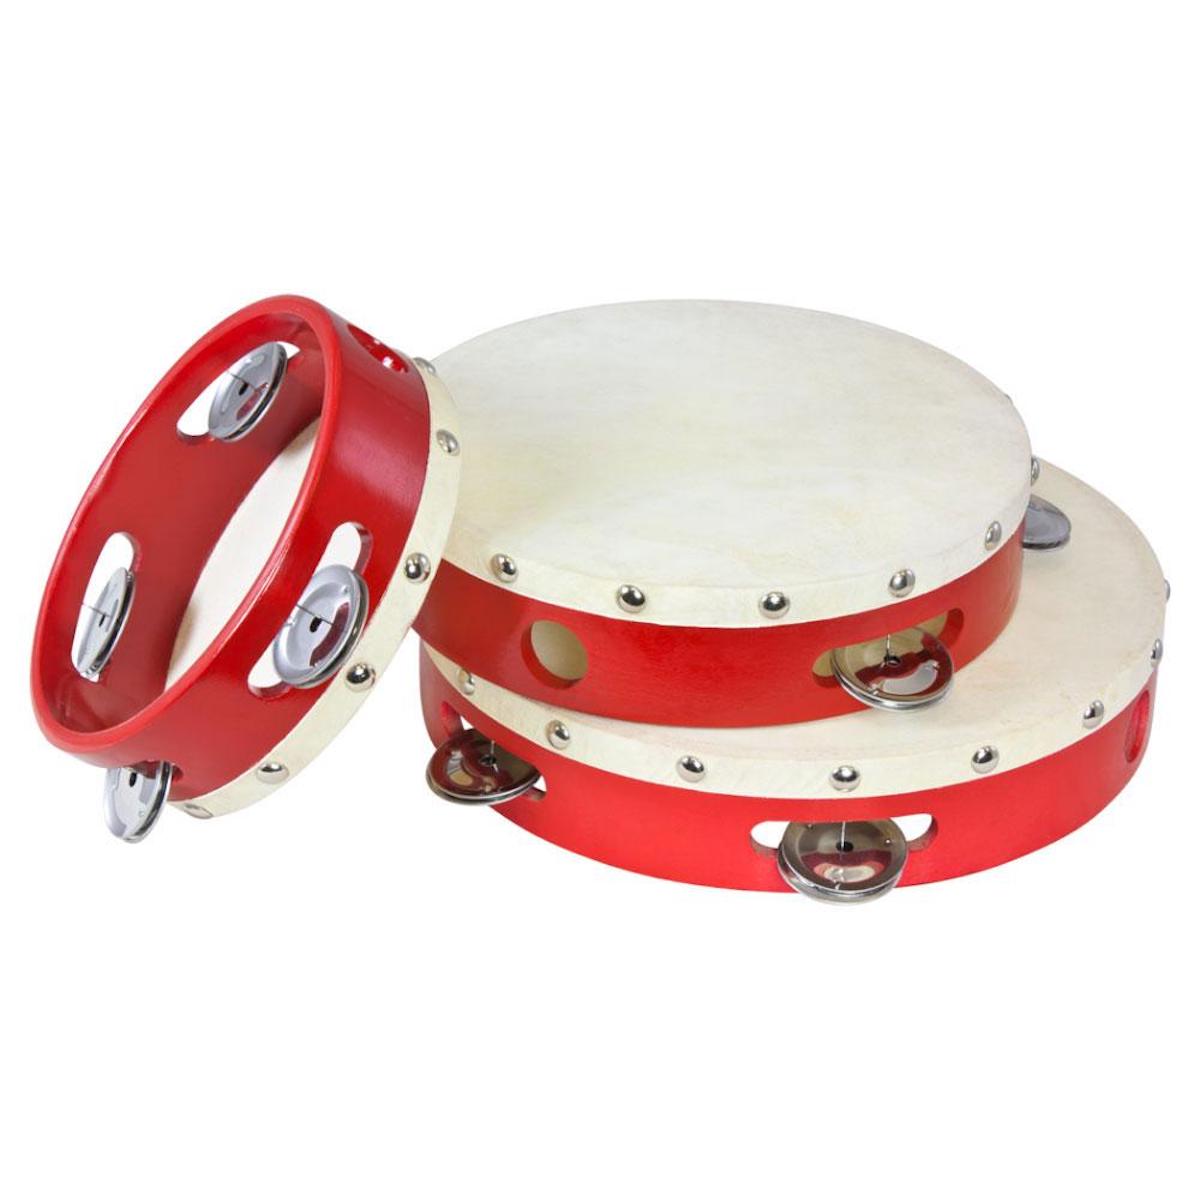 Percussion Plus Tambourine Wood Shells - 6", 8” and 9” pack